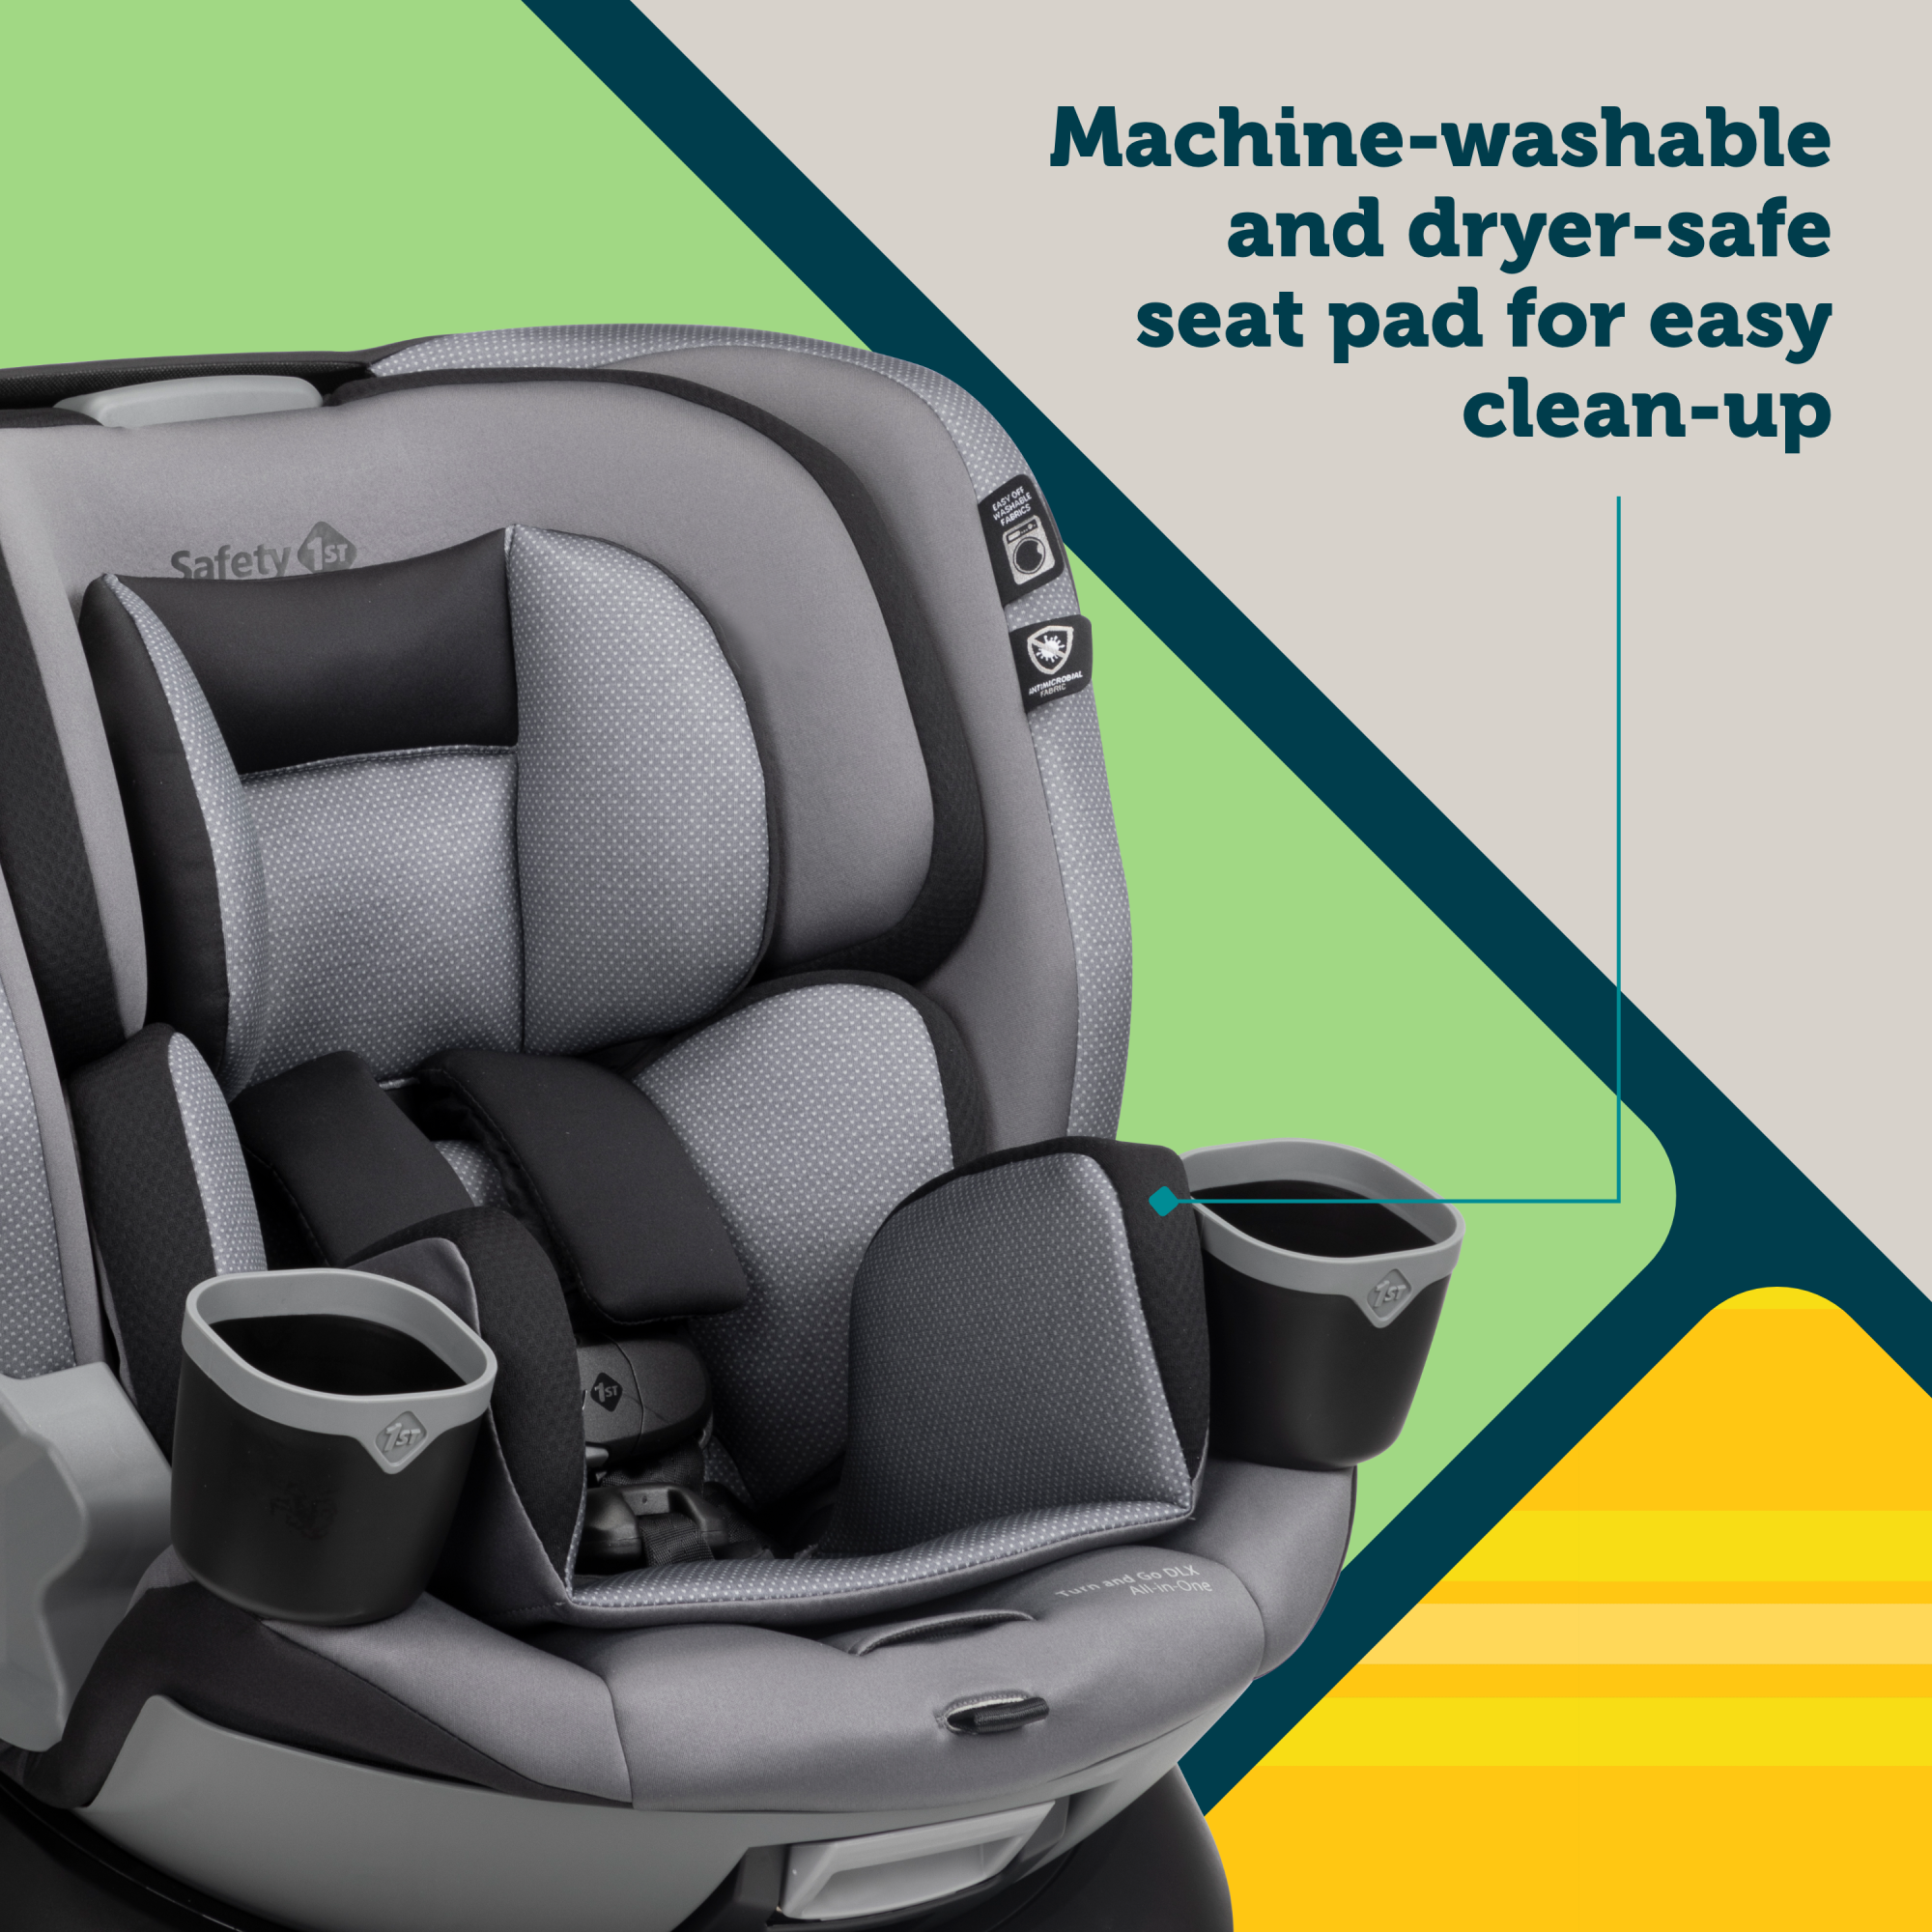 Turn and Go 360 DLX Rotating All-in-One Convertible Car Seat - back cushion flap folds down when seat is in booster mode